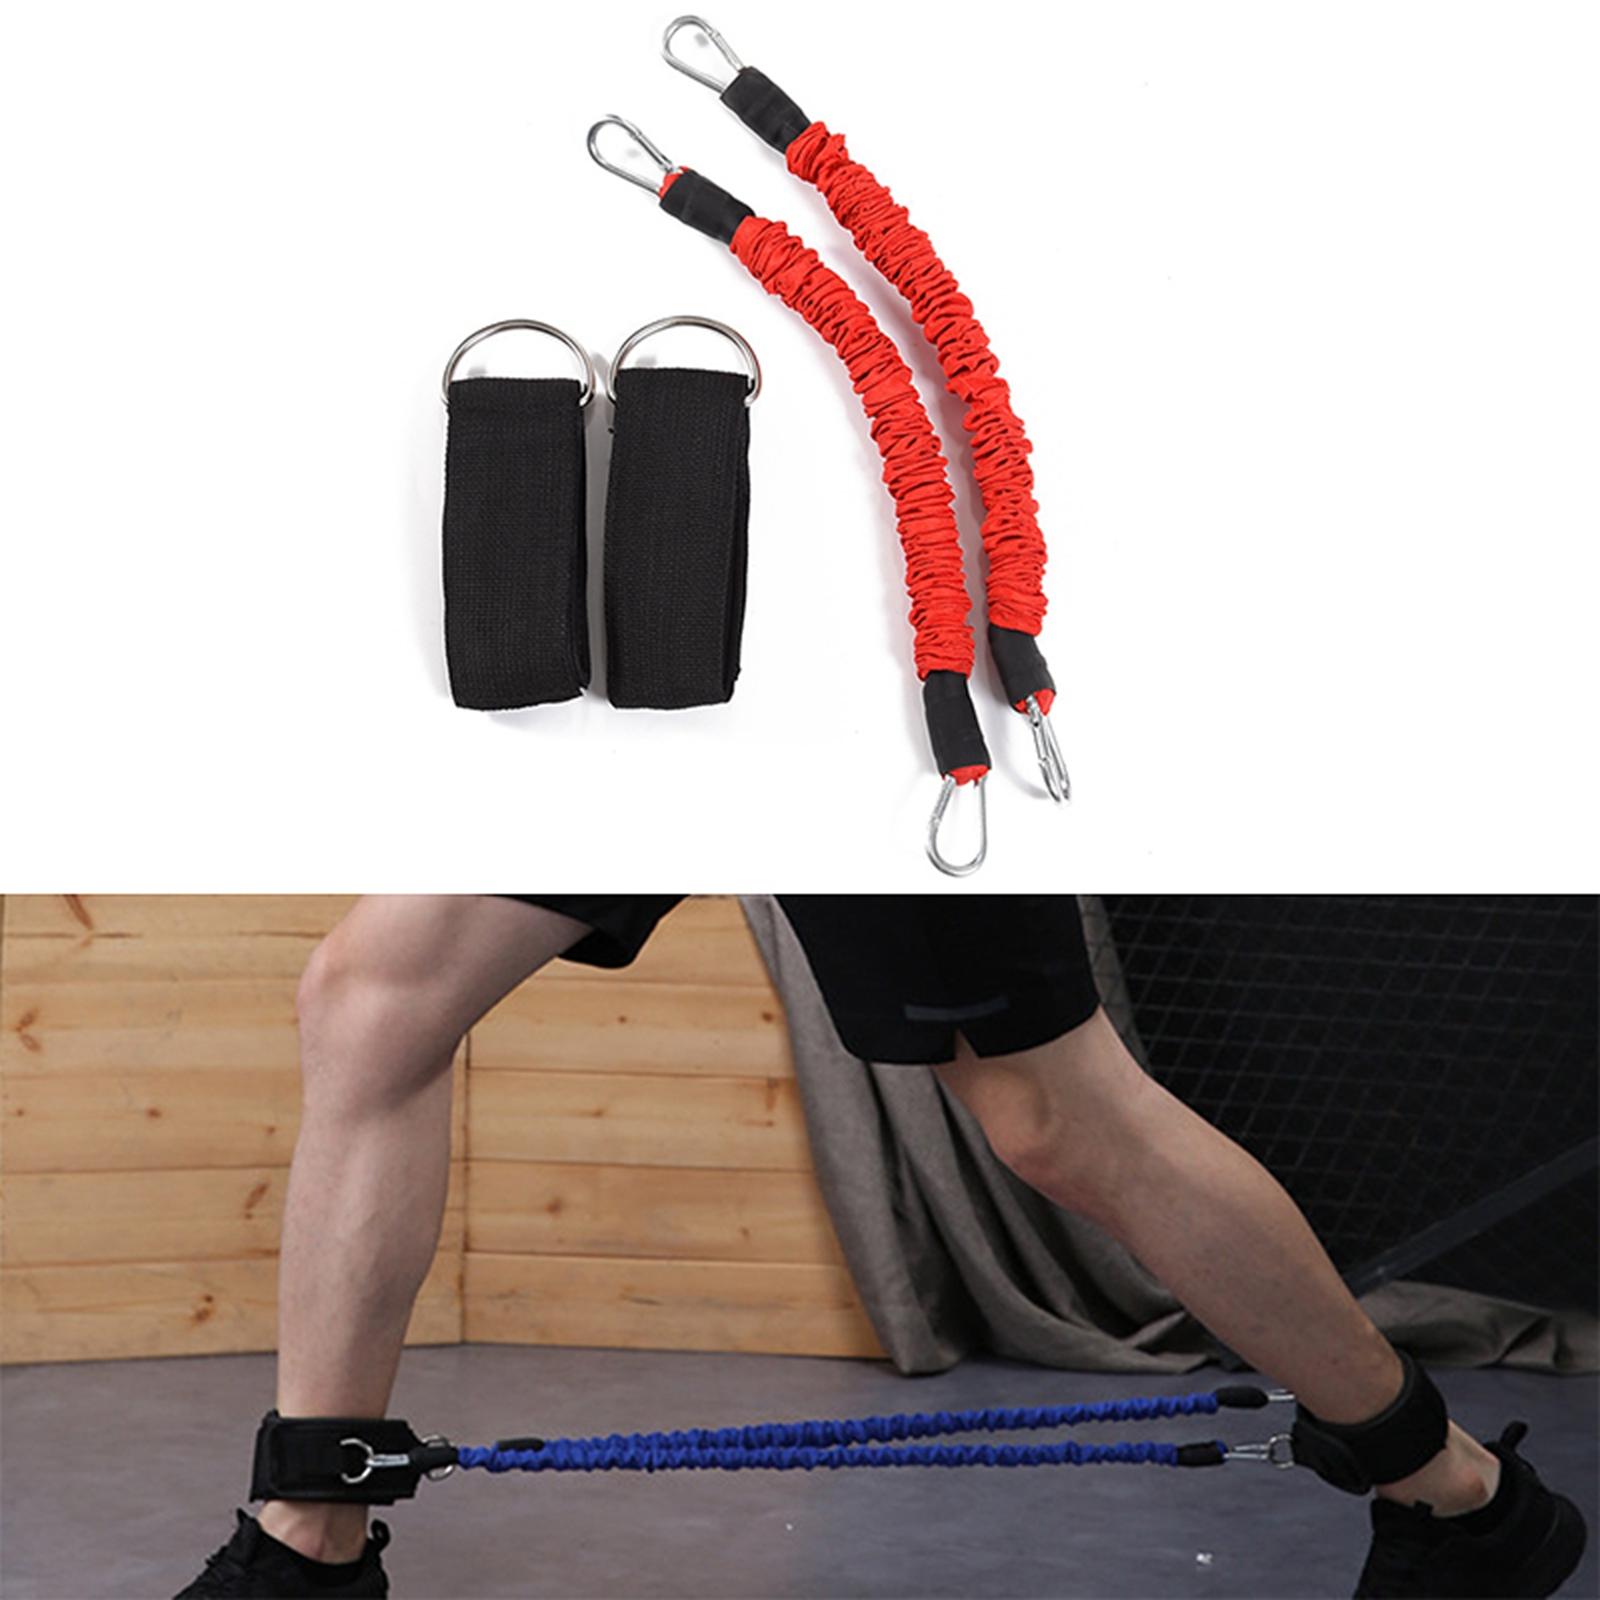 Aimishion Resistance Bands Set Bands for Legs for Speed Training Fitness